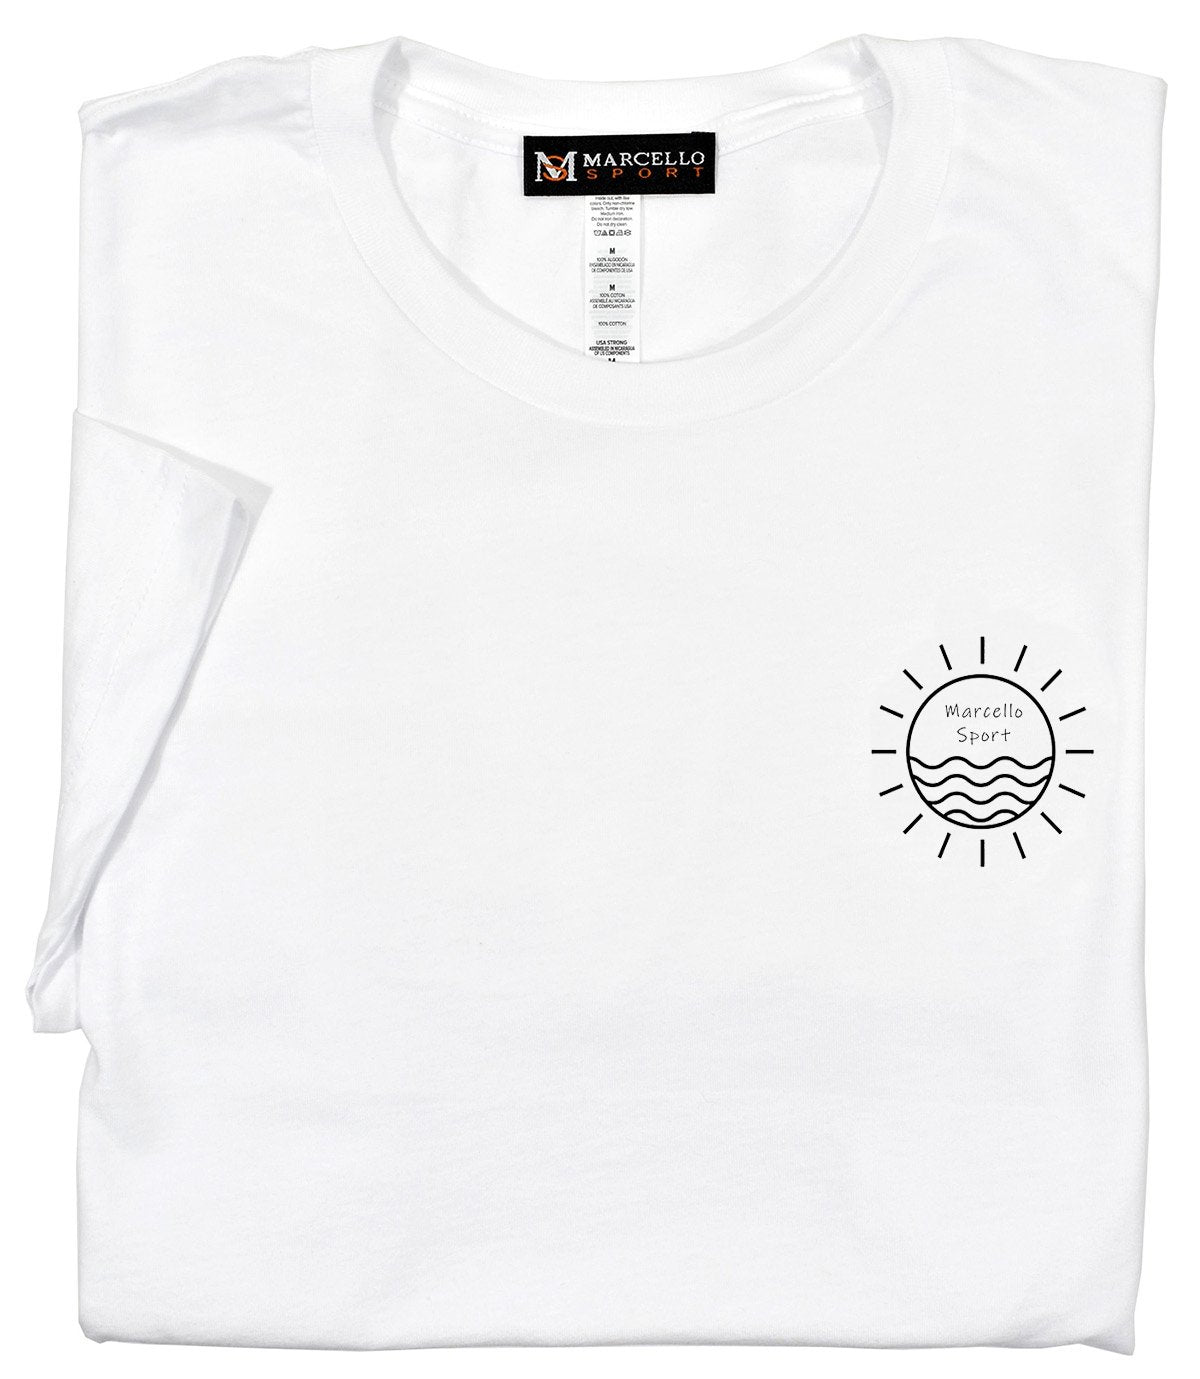 T005 Marcello Sun and Fun Tee  100% soft cotton, preshrunk. Super soft luxe cotton fabric. Contemporary fit, we suggest ordering one size up if between sizes or prefer a looser fit. Machine wash and dry.